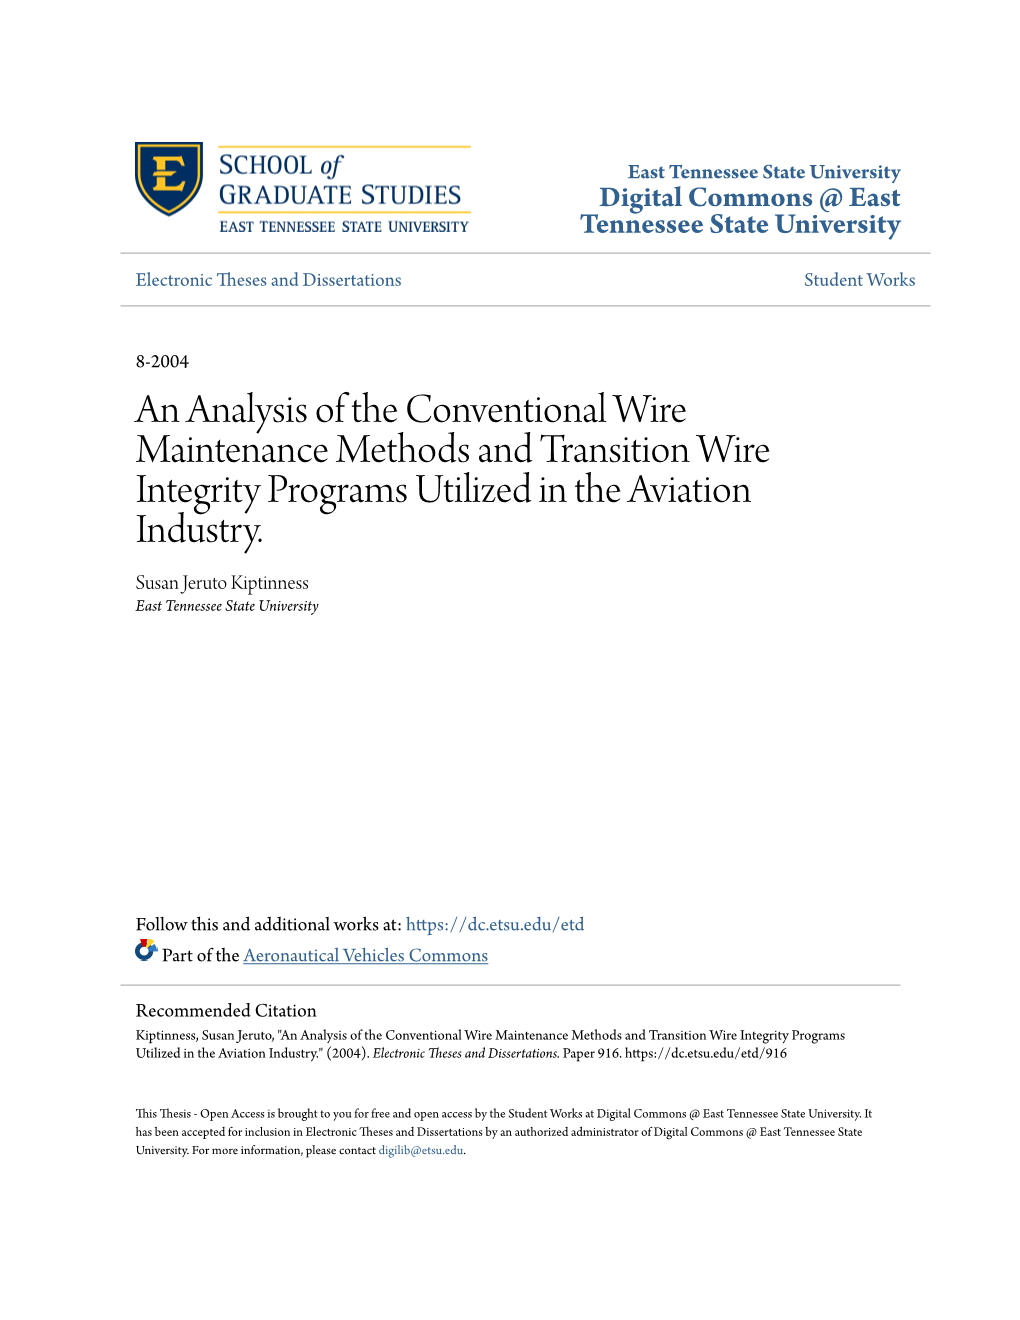 An Analysis of the Conventional Wire Maintenance Methods and Transition Wire Integrity Programs Utilized in the Aviation Industry